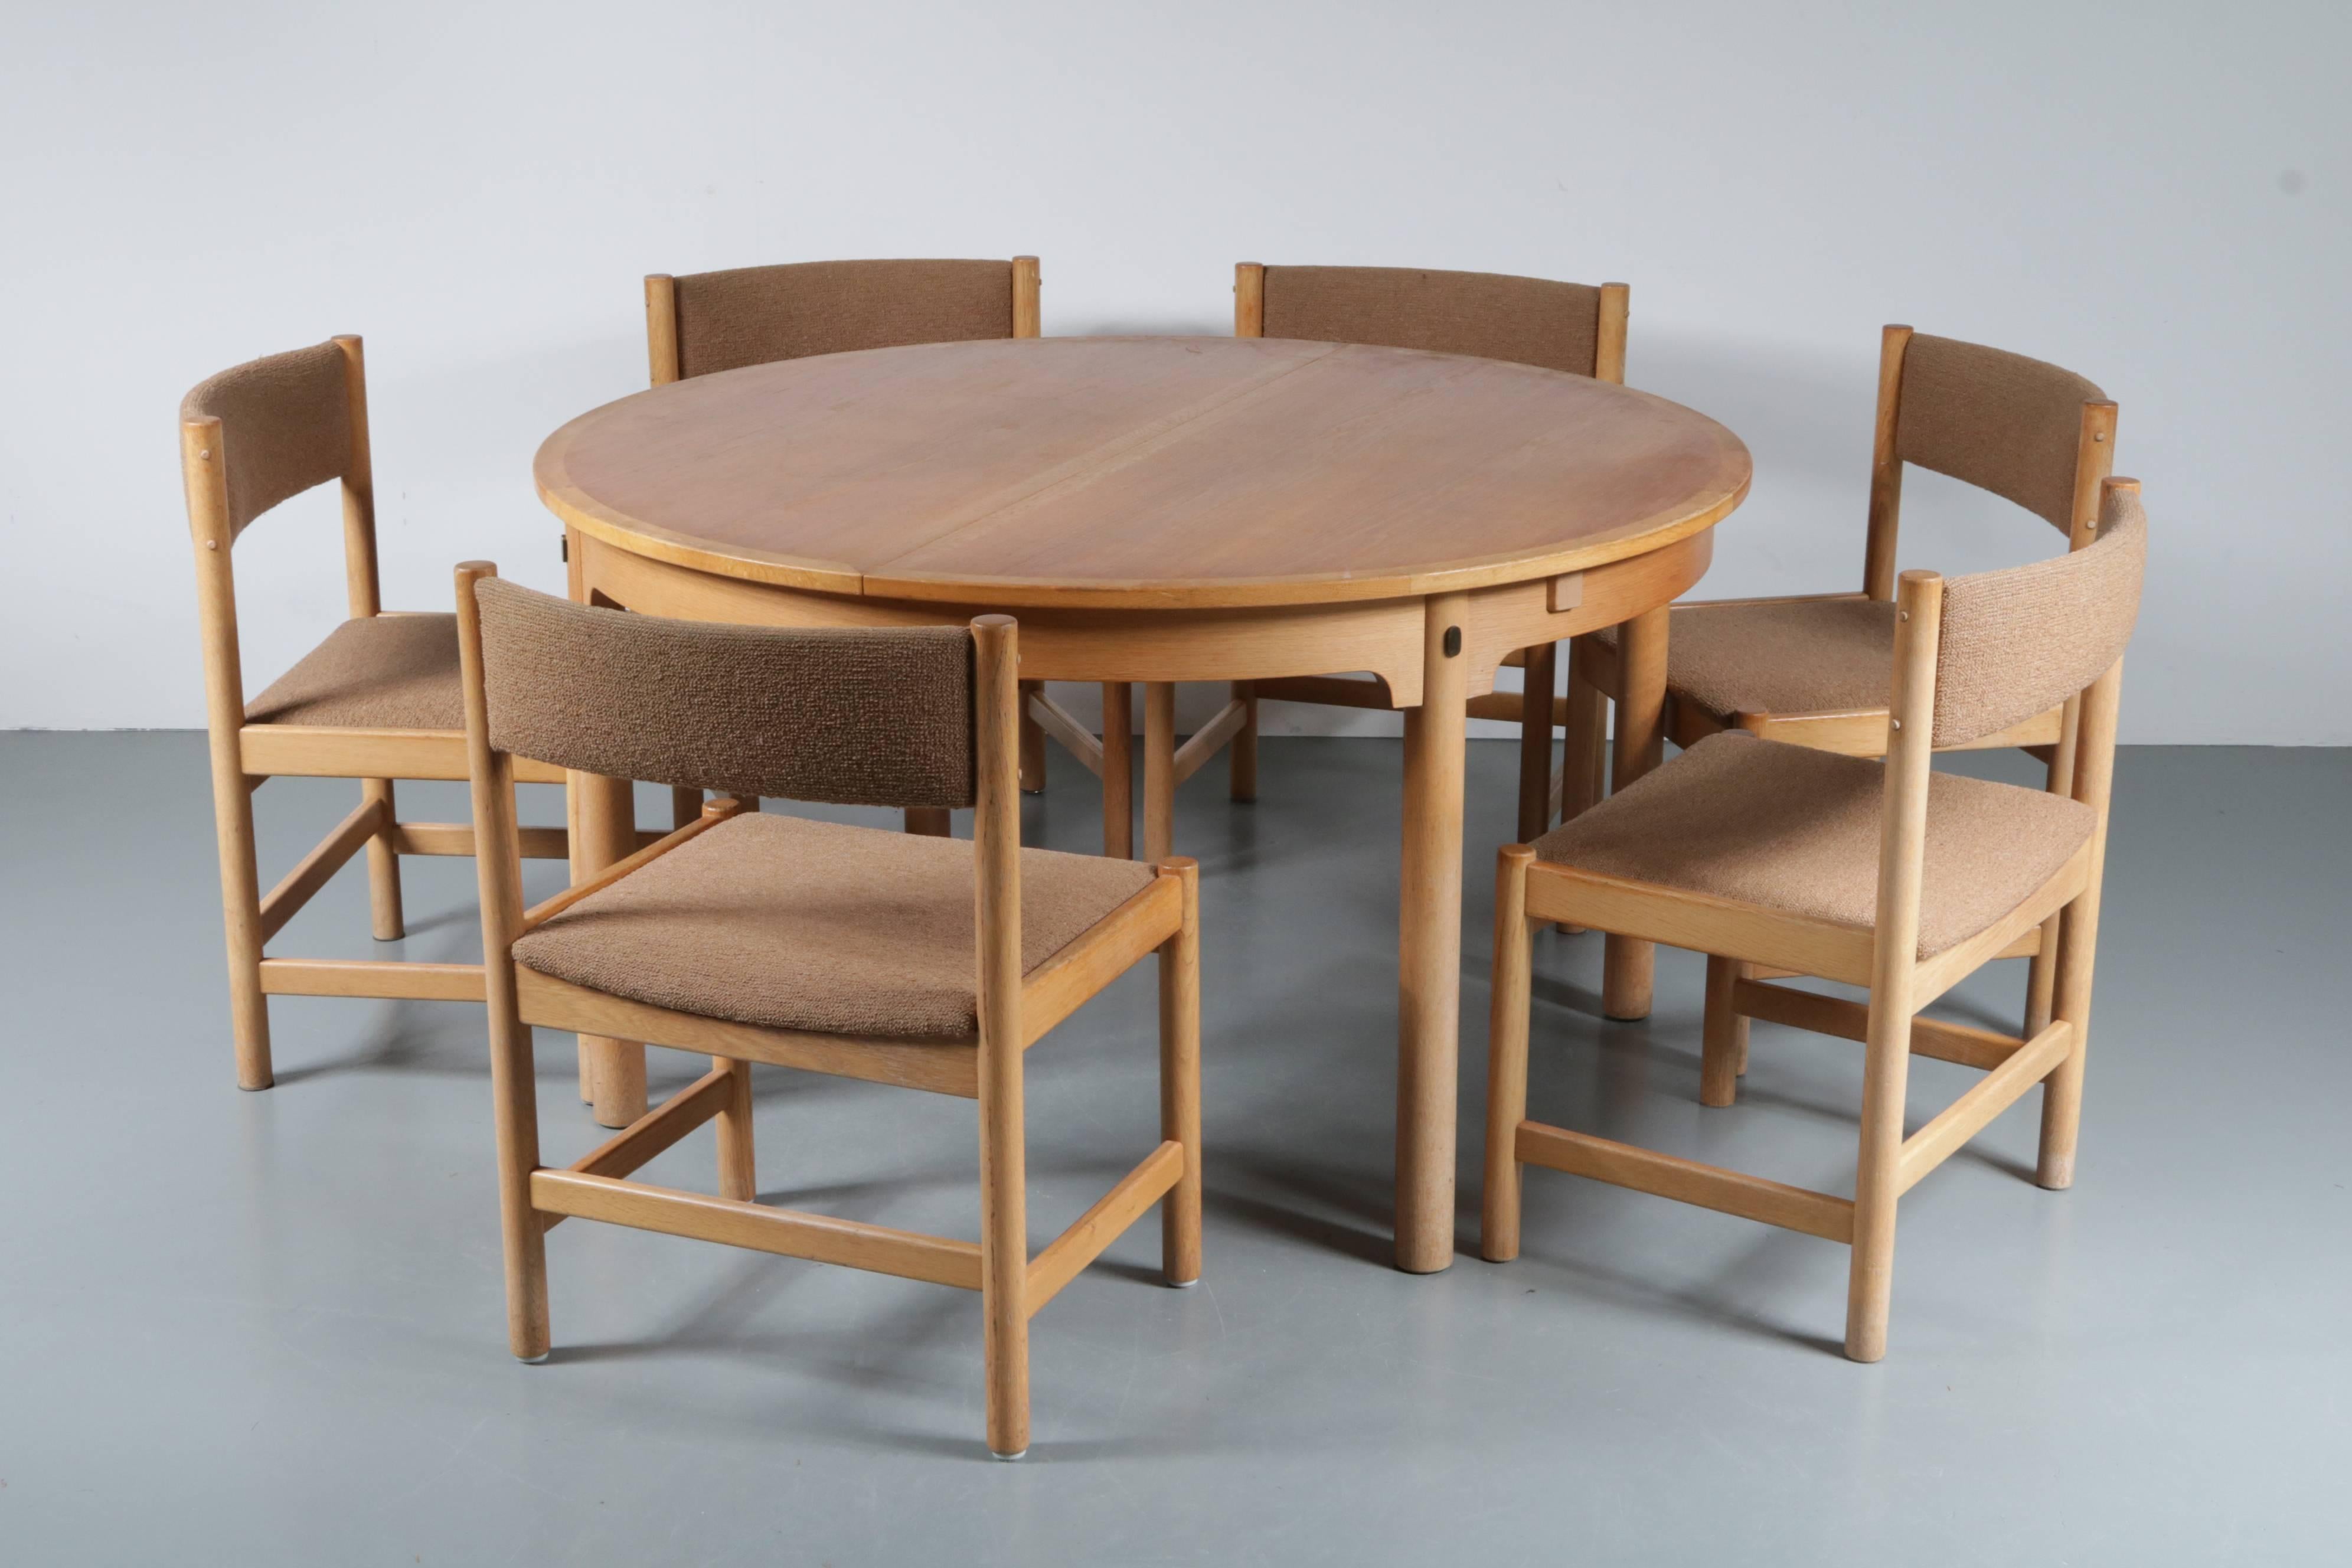 A beautiful dining set designed by Børge Mogensen, manufactured by Karl Andersson & Söner in Denmark, circa 1960.

The set contains one table and six chairs, made of high quality oakwood, very nicely crafted with an impressive eye for detail.